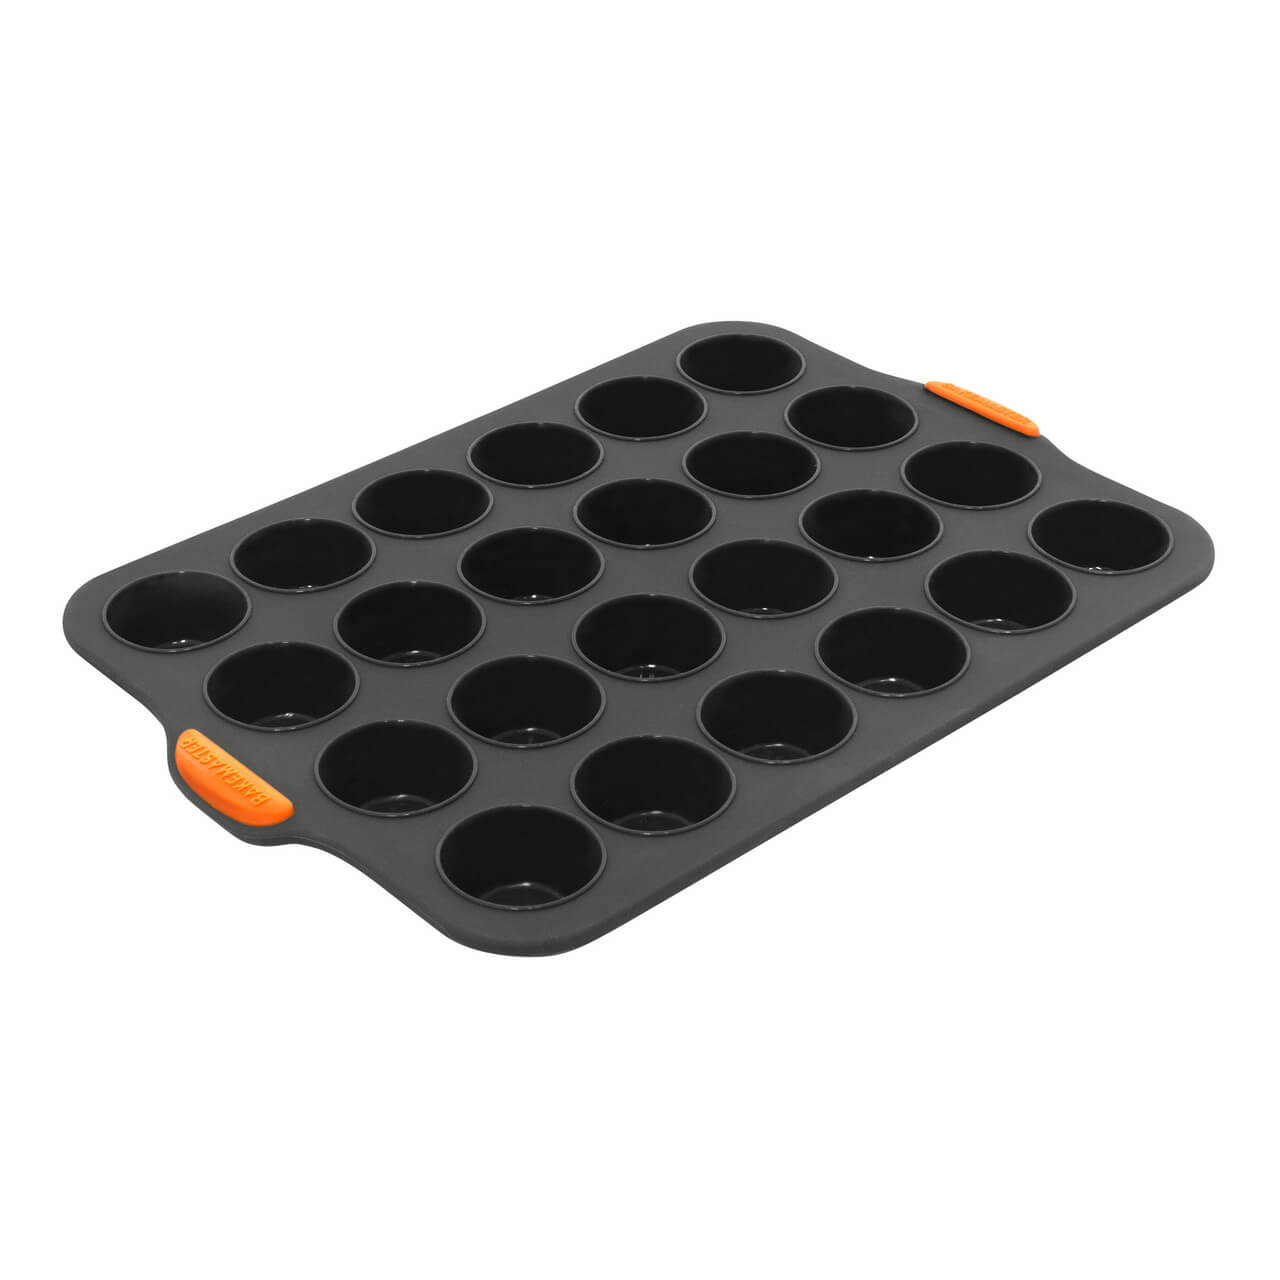 Bakemaster Silicone Mini Muffin Pan 24cup